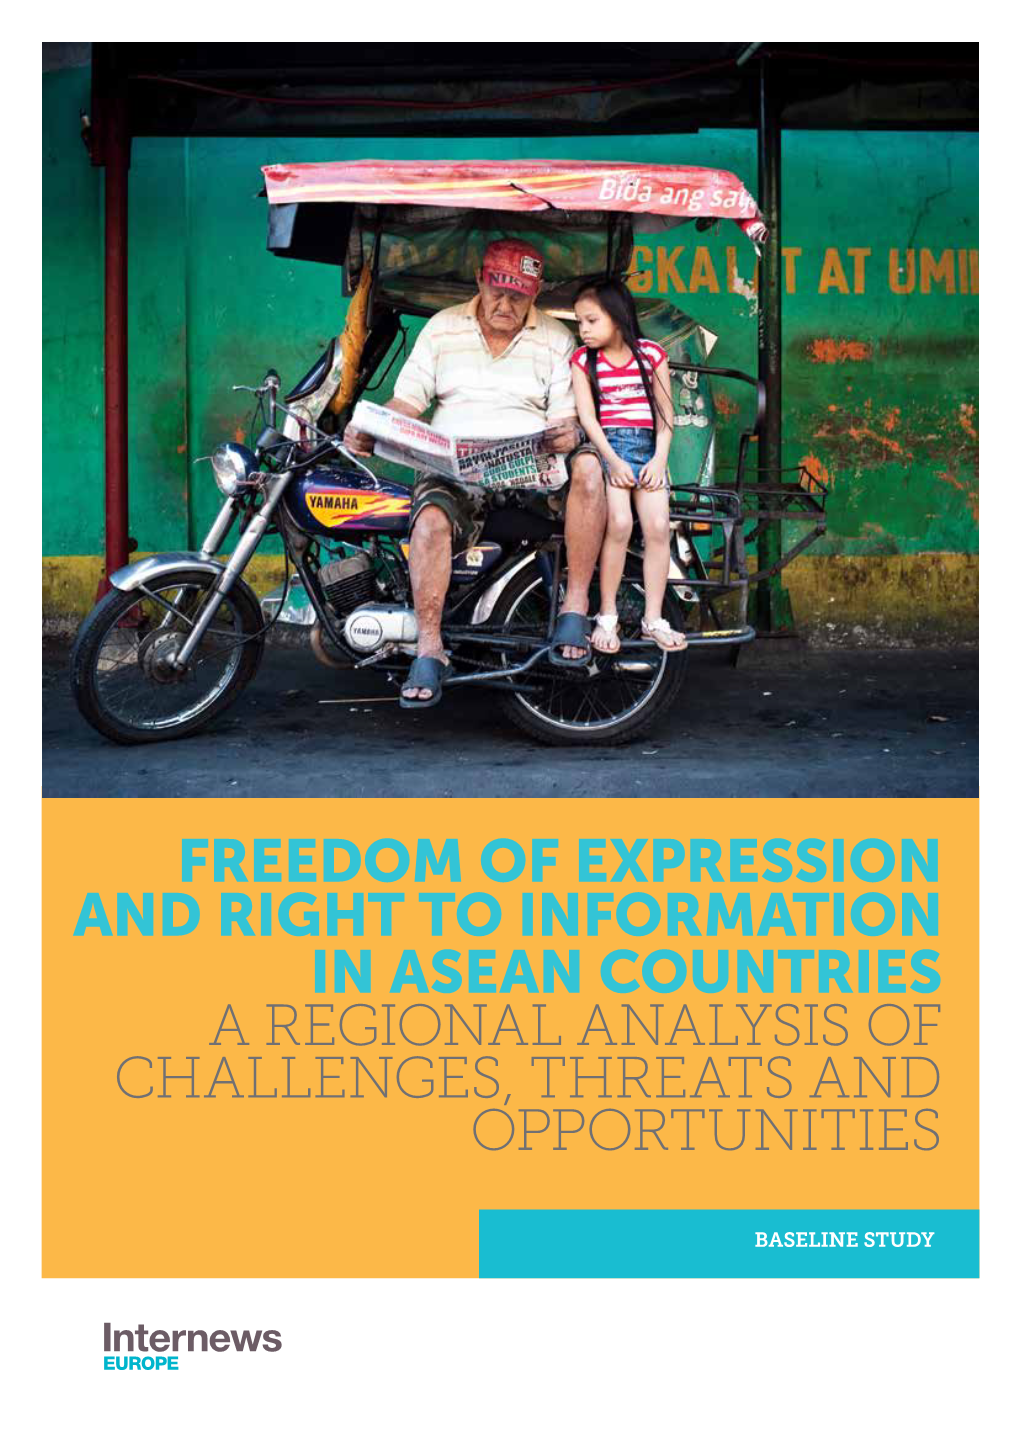 Freedom of Expression and Right to Information in Asean Countries a Regional Analysis of Challenges, Threats and Opportunities